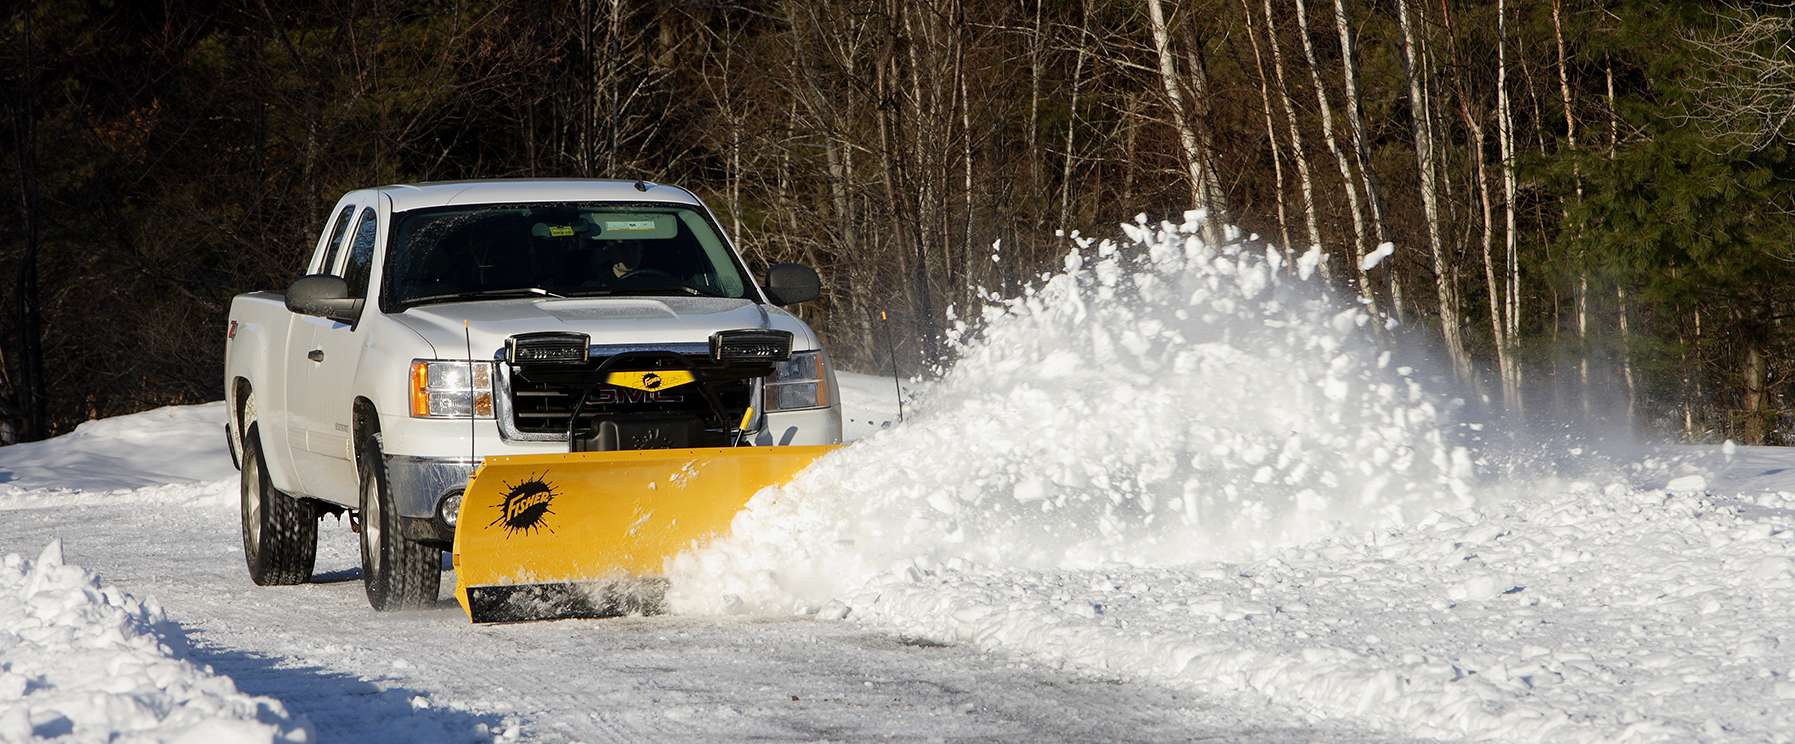 Truck Accessories Store | Lee, Newmarket, NH | Fisher Plows Of Lee, NH